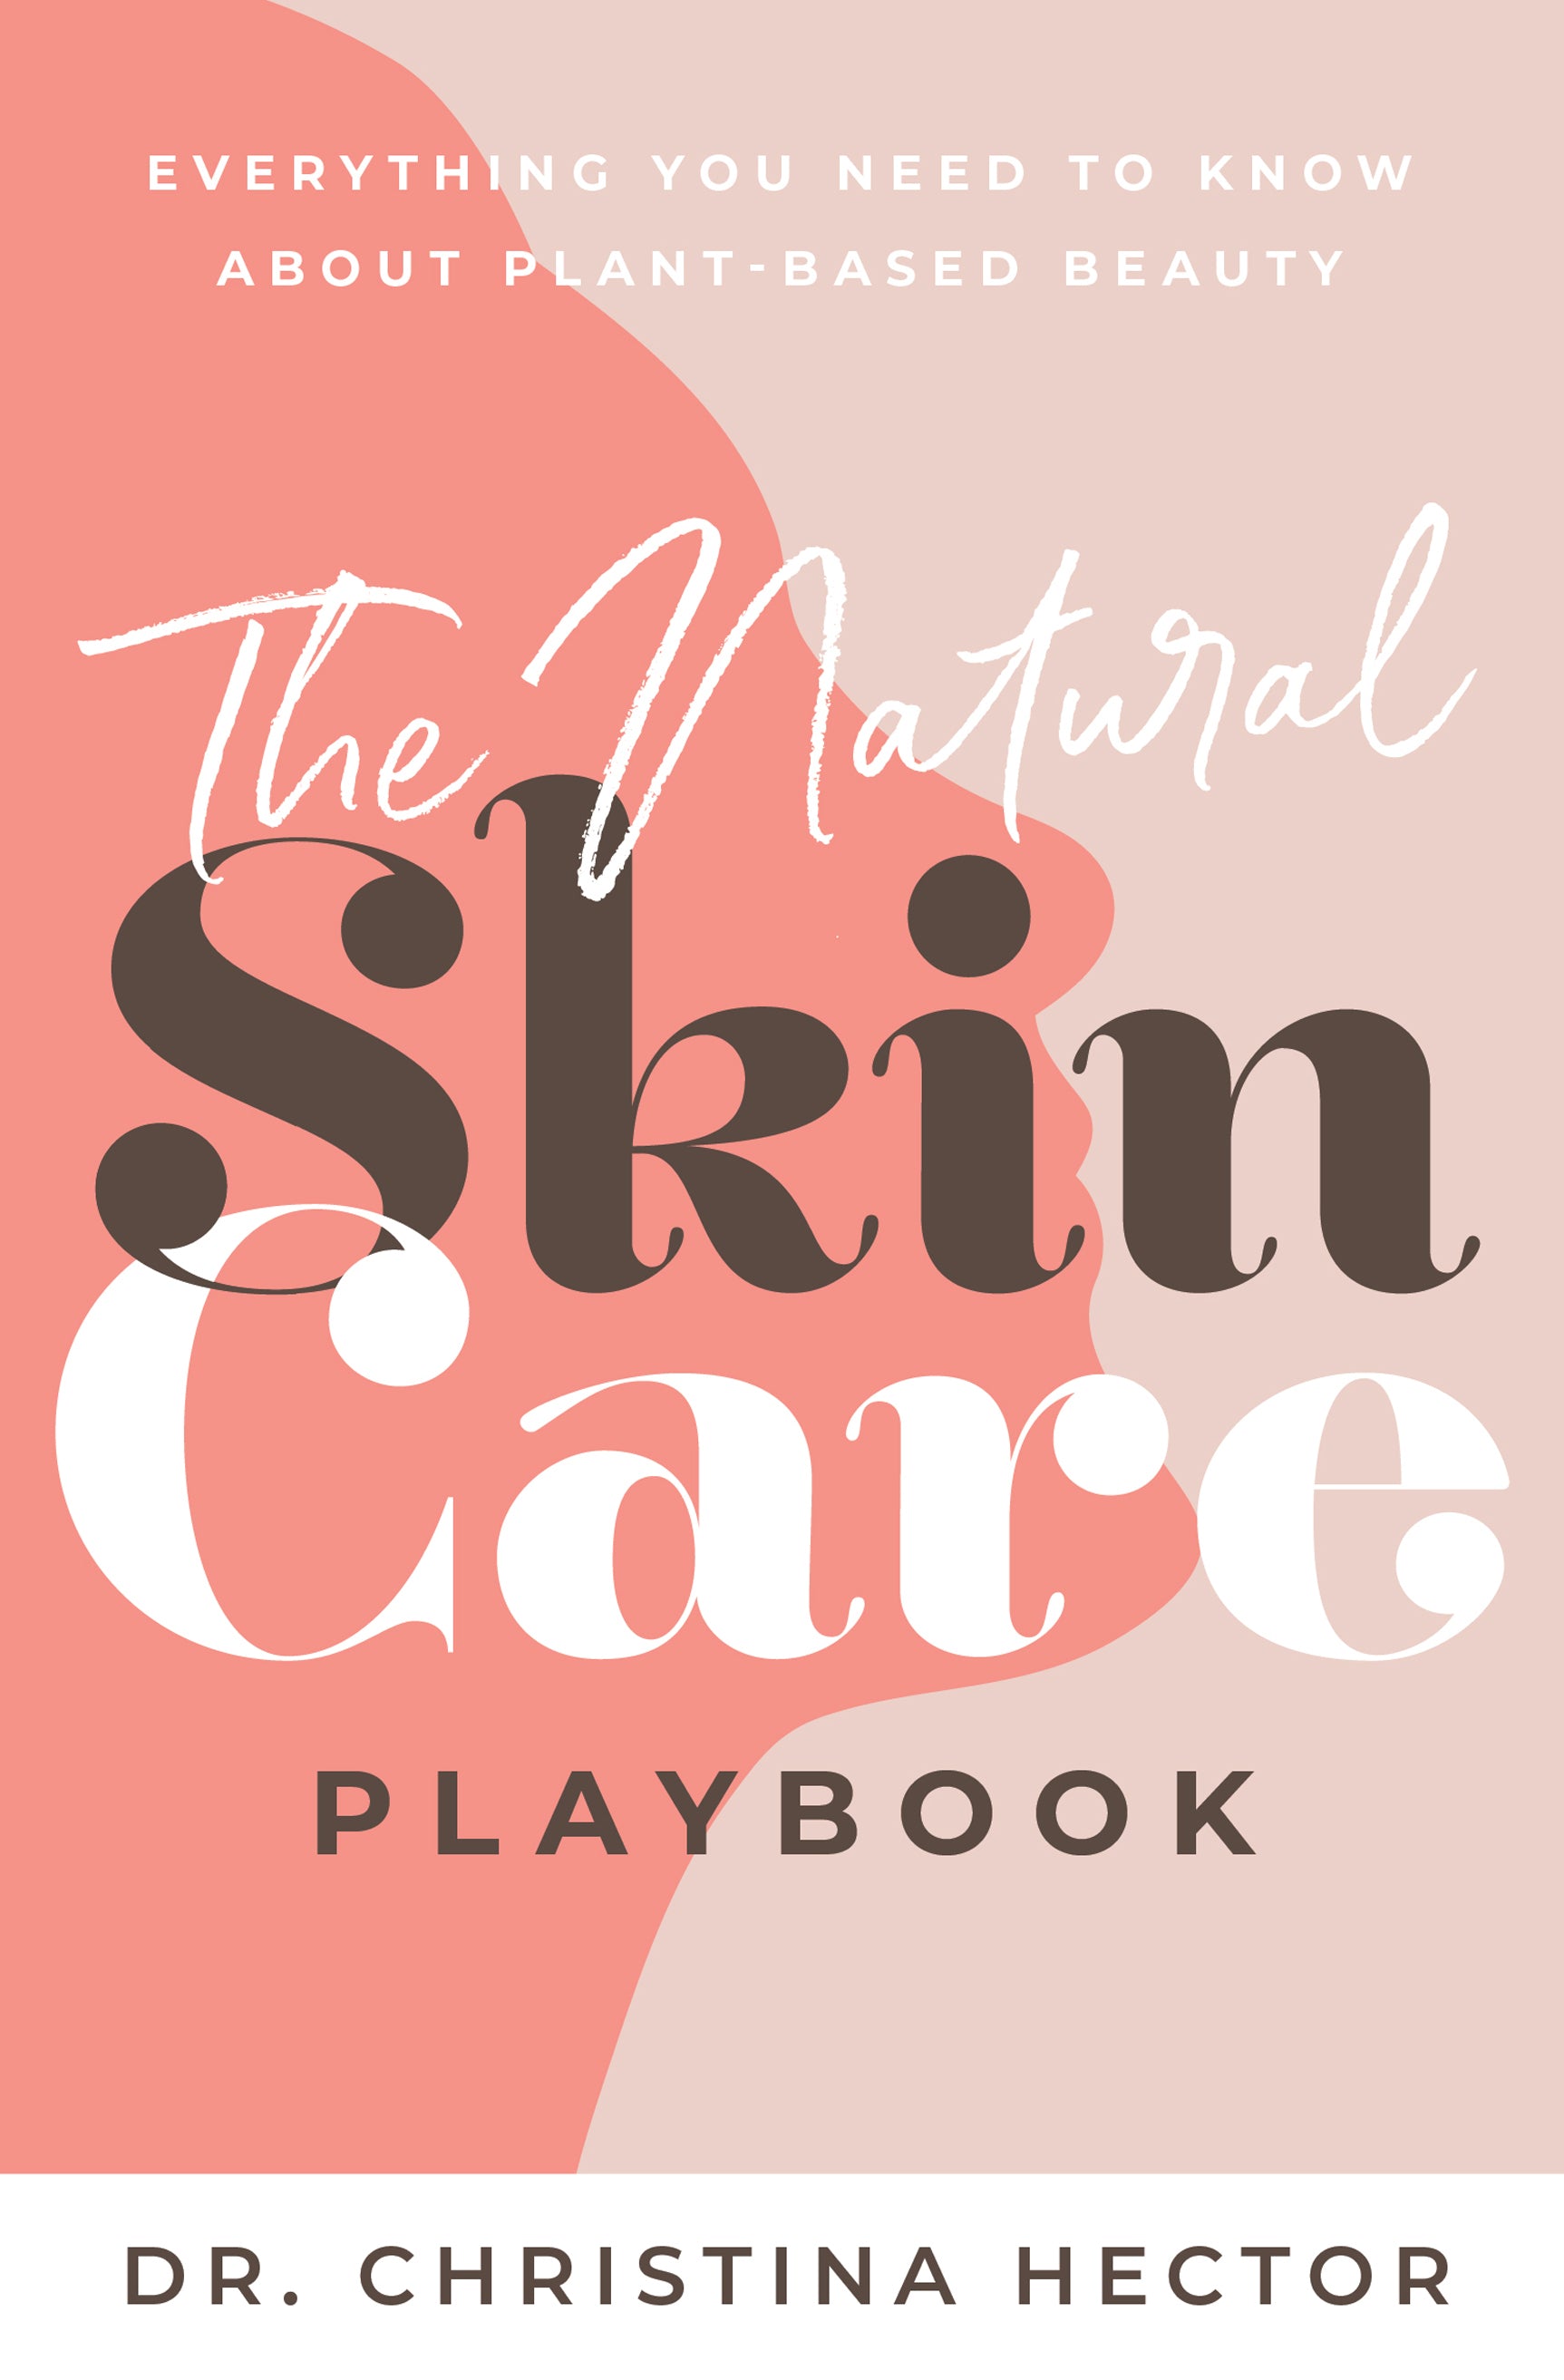 The Natural Skin Care Playbook: Everything You Need to Know about Plant-Based Beauty